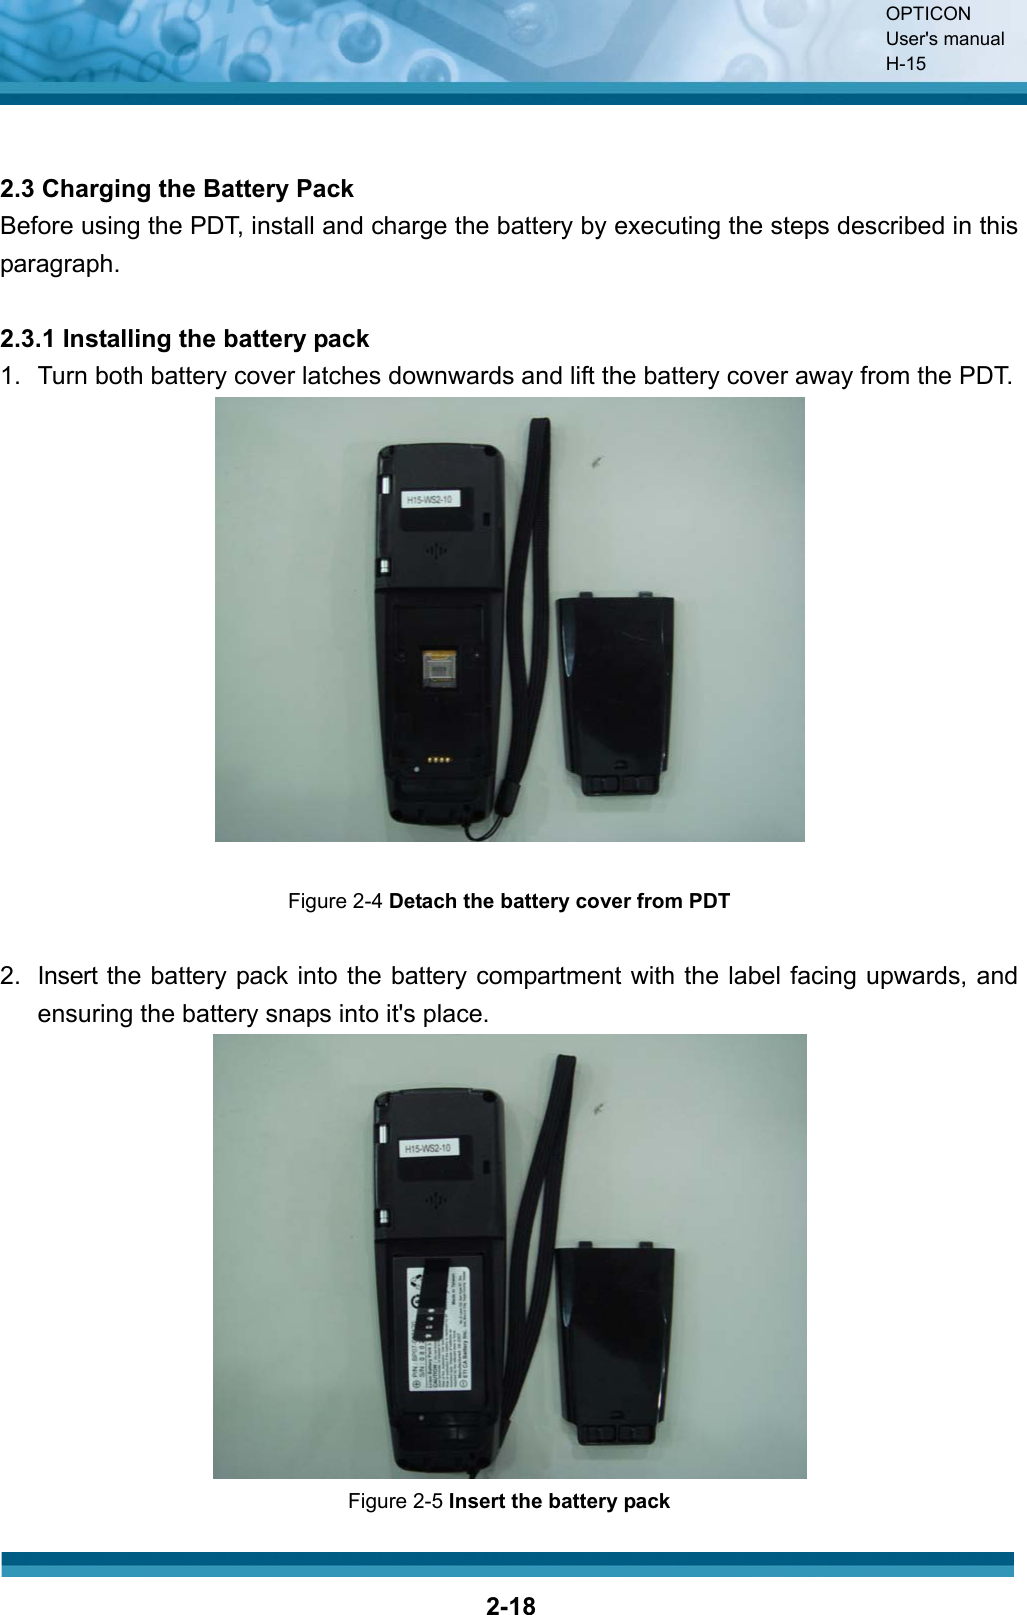 OPTICON User&apos;s manual H-152-182.3 Charging the Battery Pack Before using the PDT, install and charge the battery by executing the steps described in this paragraph. 2.3.1 Installing the battery pack 1.  Turn both battery cover latches downwards and lift the battery cover away from the PDT. Figure 2-4 Detach the battery cover from PDT 2.  Insert the battery pack into the battery compartment with the label facing upwards, and ensuring the battery snaps into it&apos;s place. Figure 2-5 Insert the battery pack